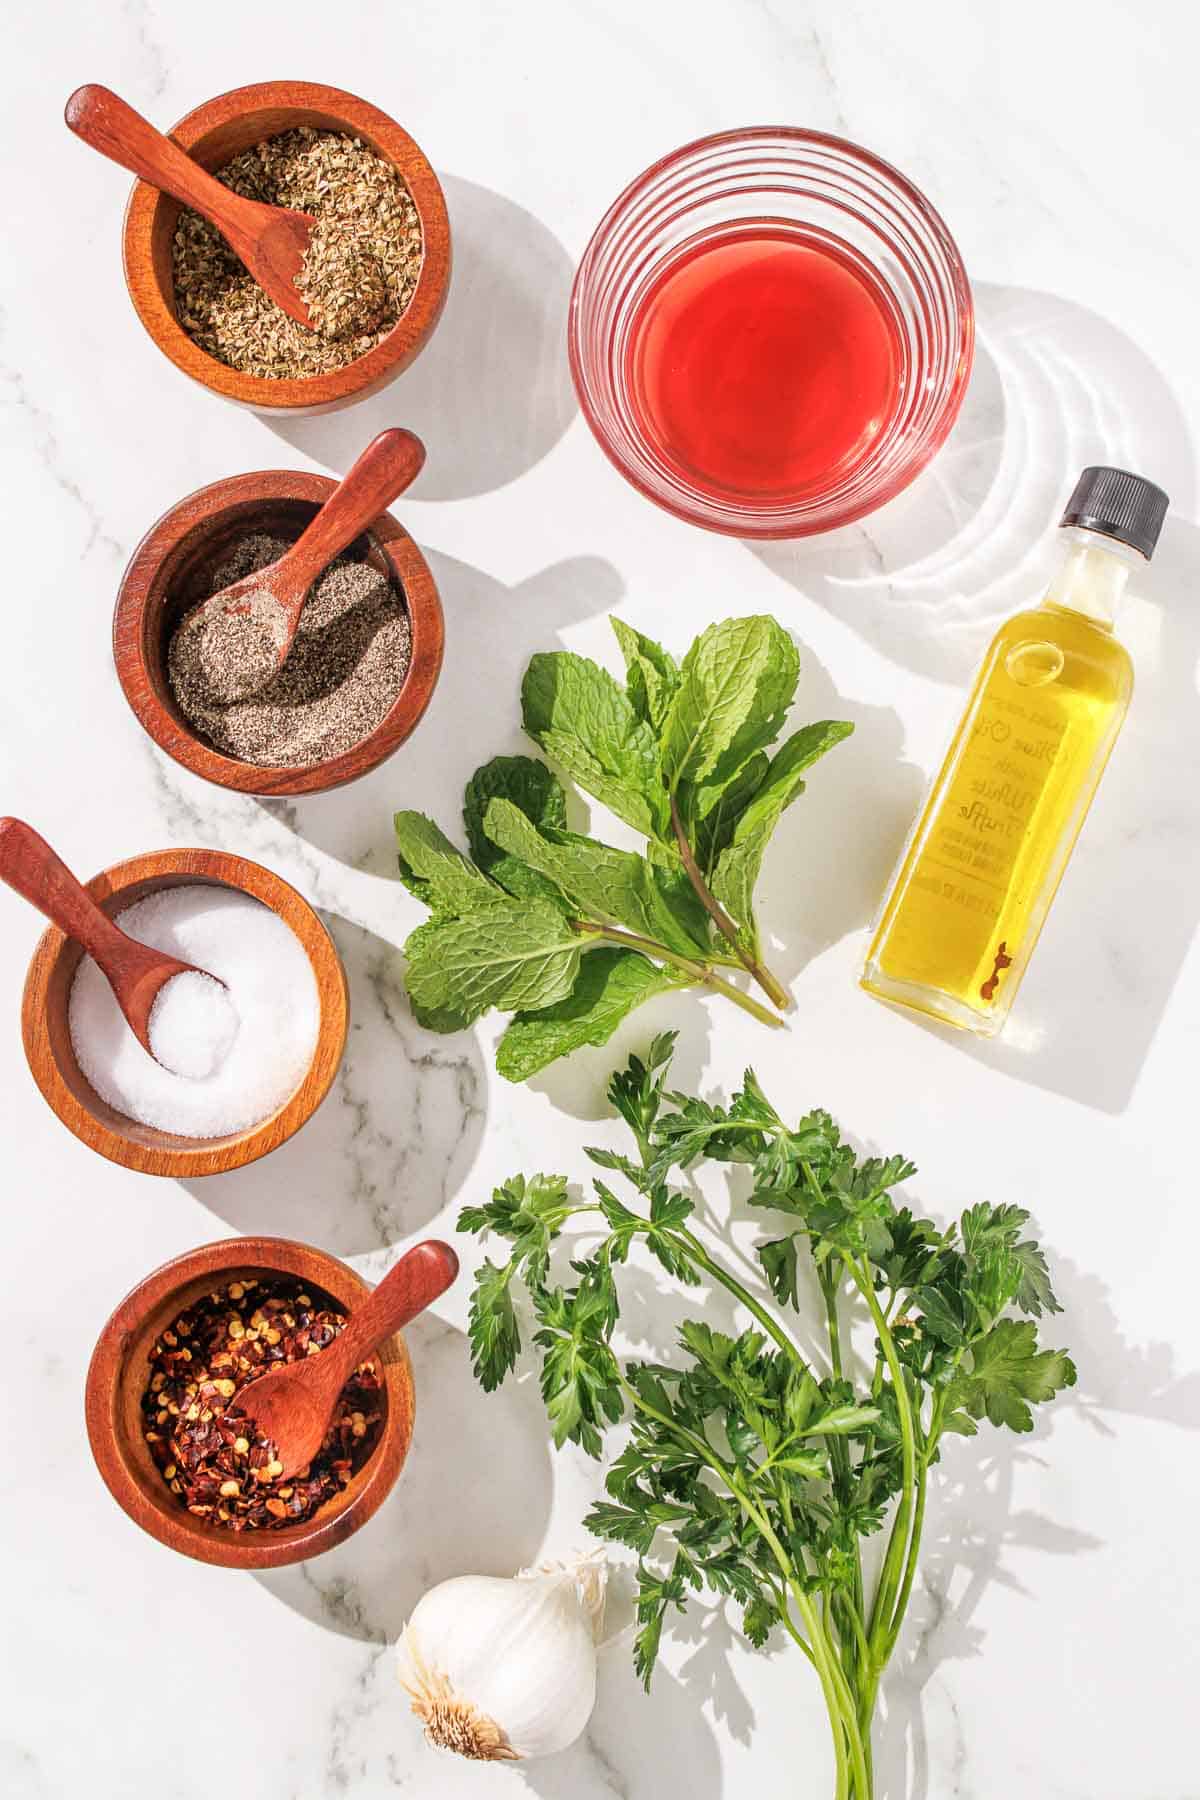 Overhead view of various cooking ingredients including herbs, spices, olive oil, and vinegar arranged neatly on a marble surface.